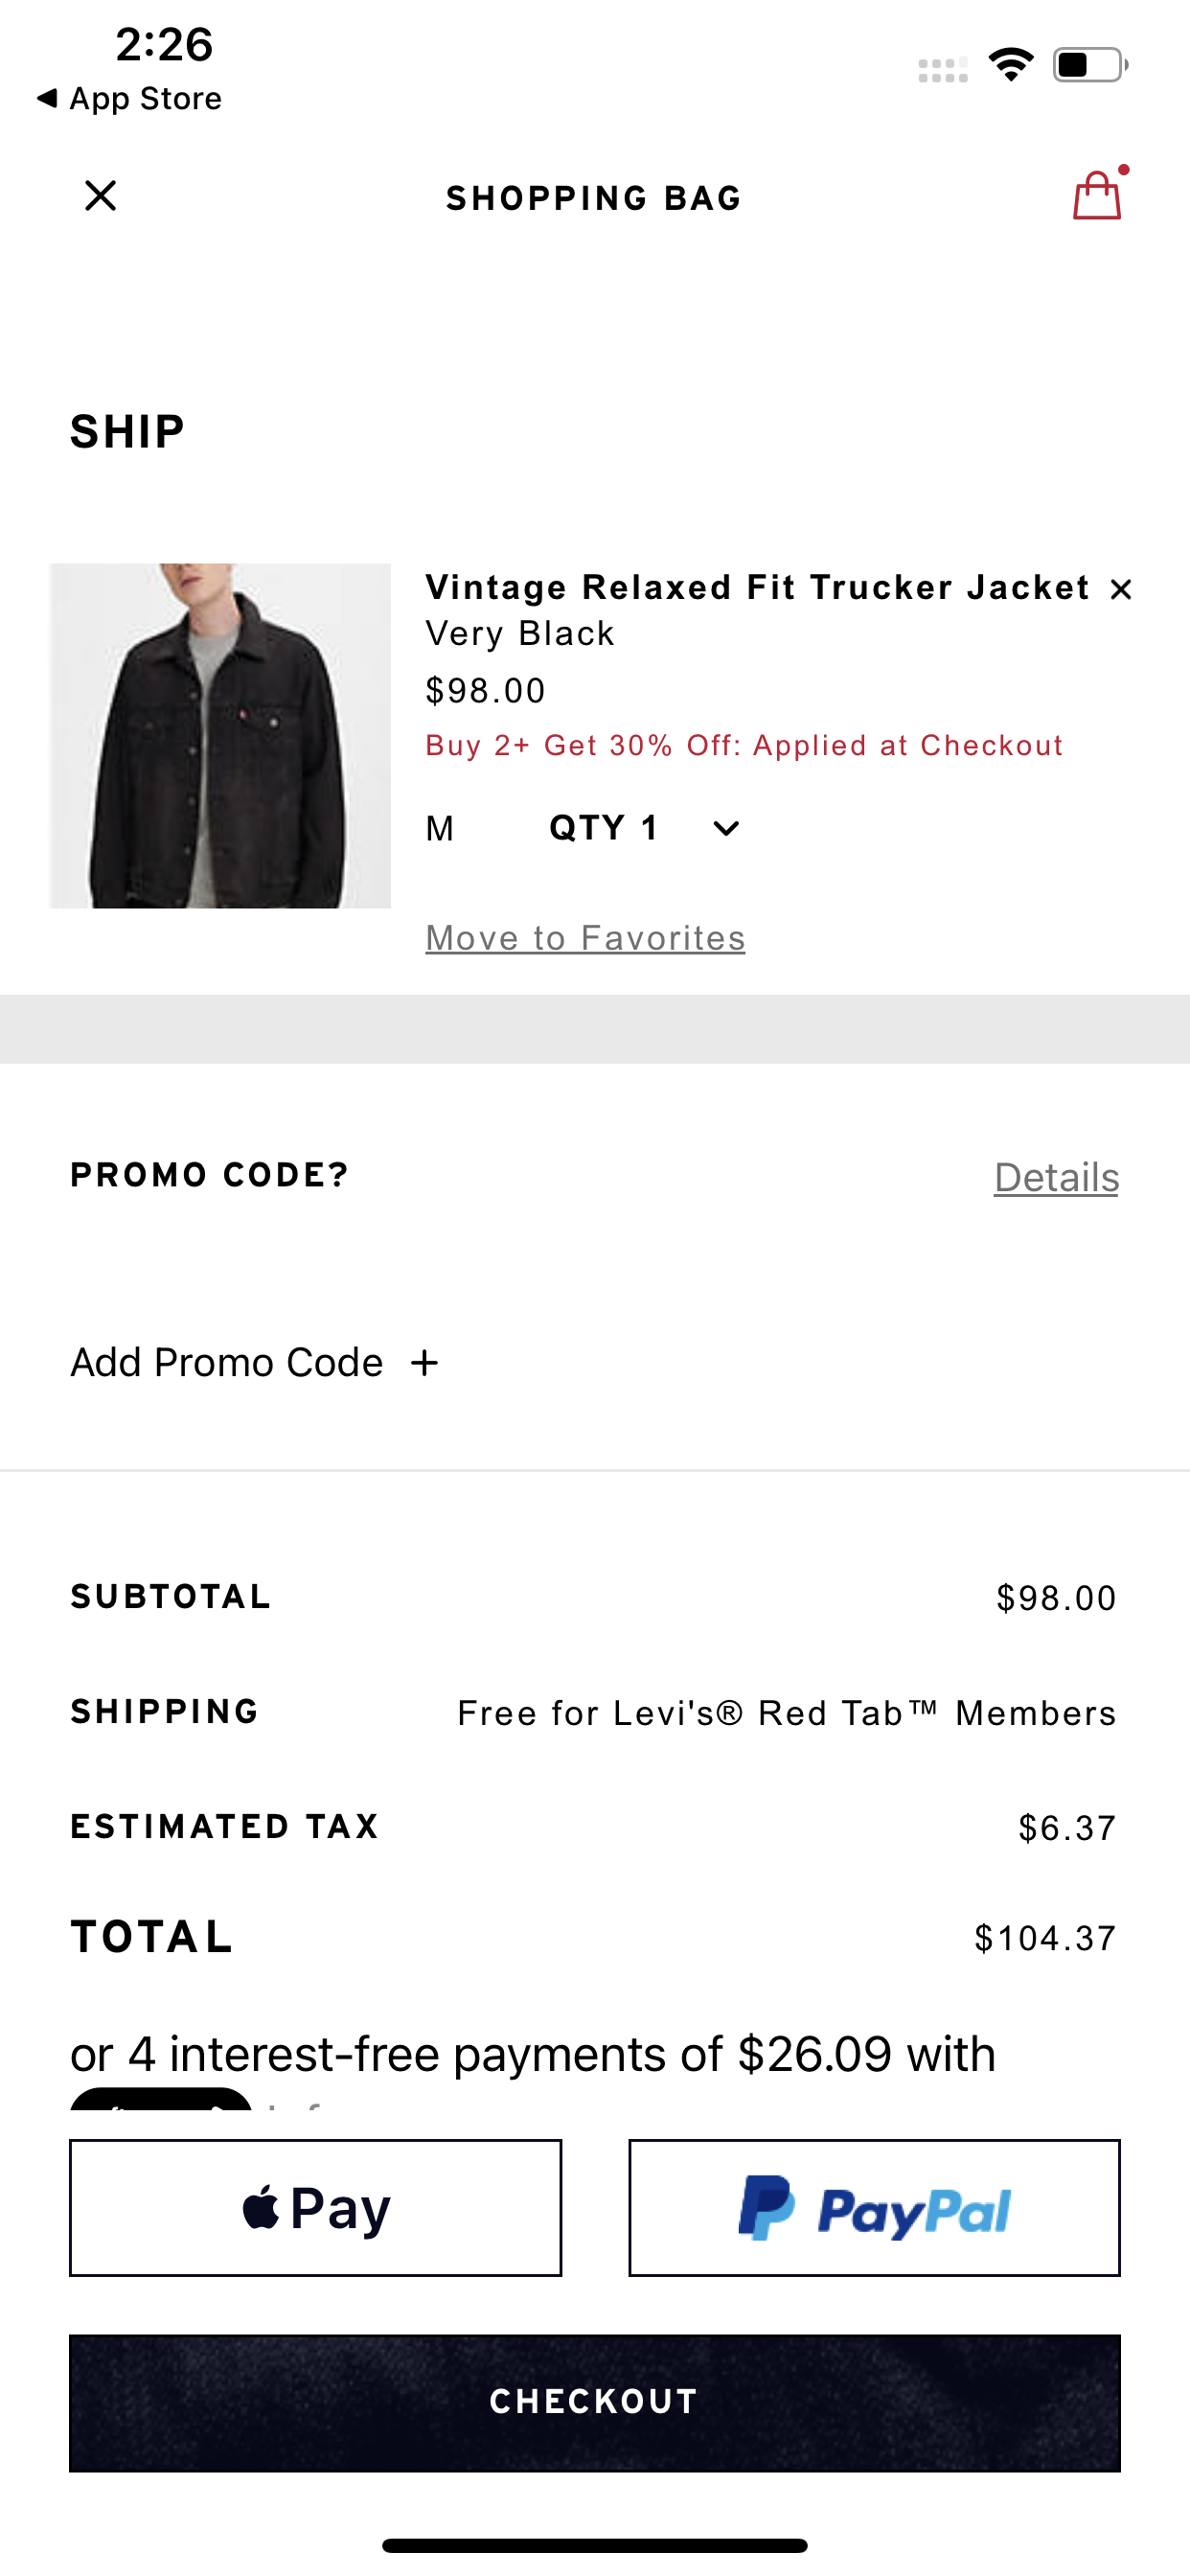 Levi's accepts Apple Pay in its app.